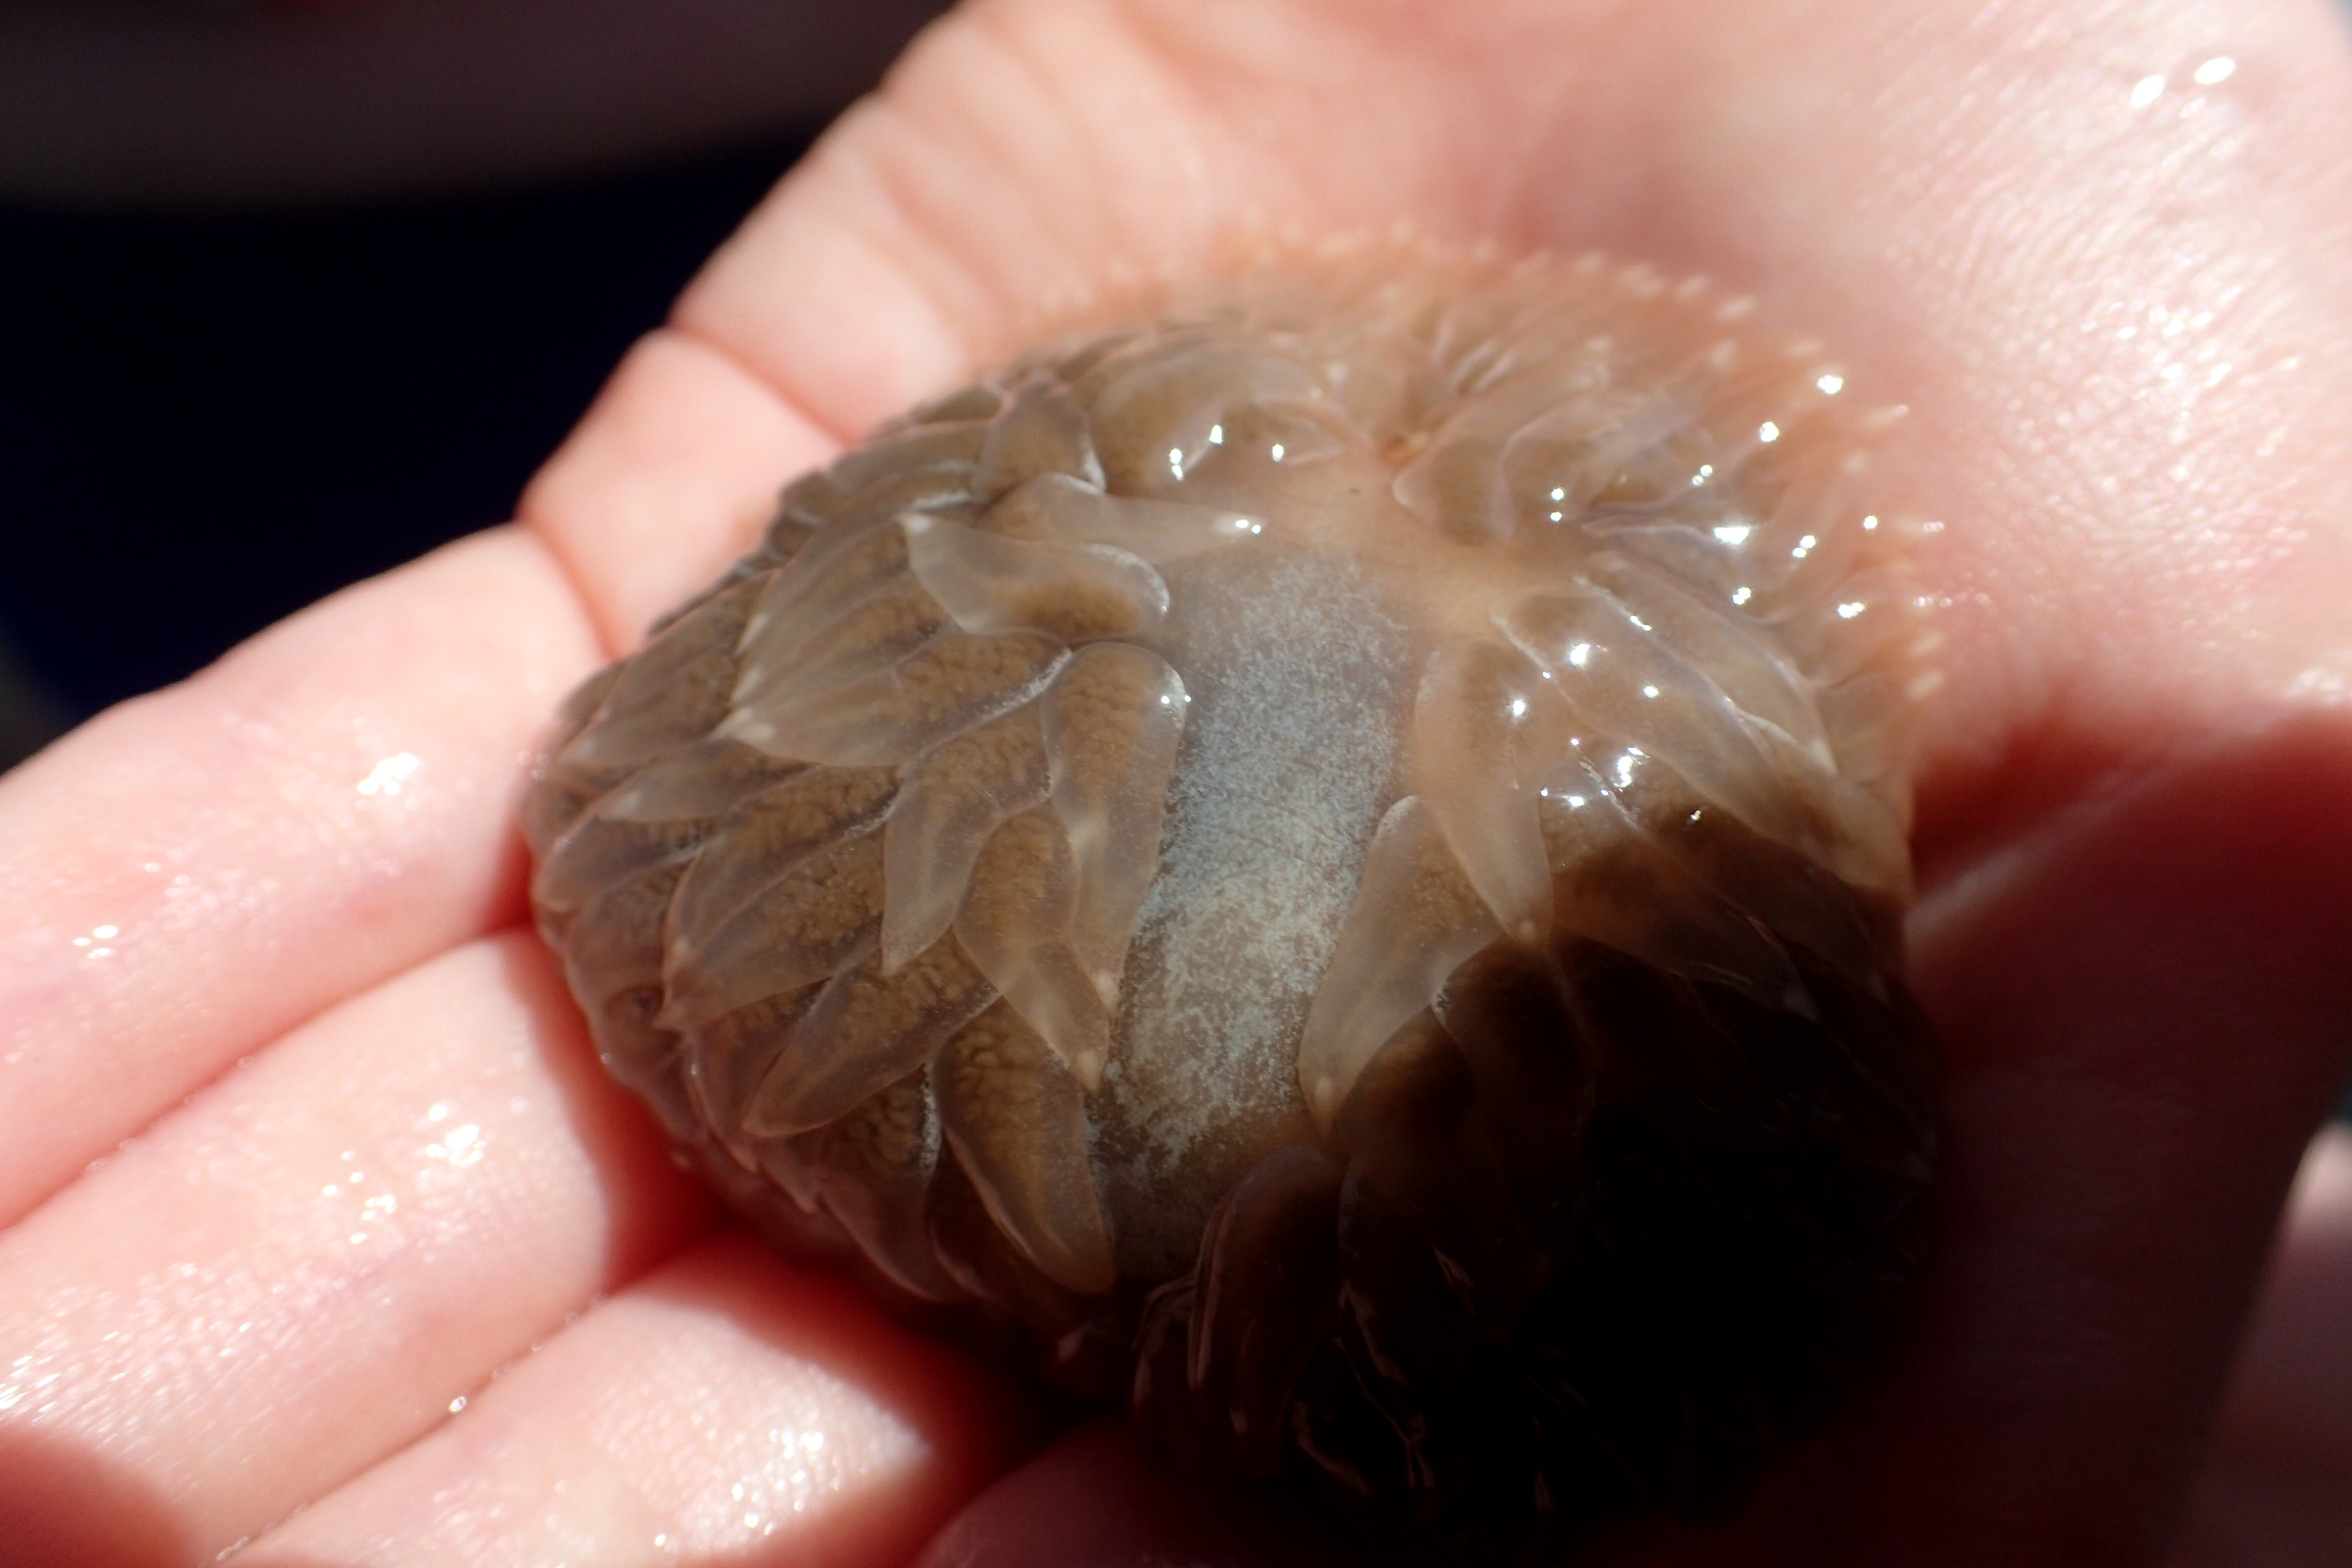 Out of the water, sea slugs appear to be blobs of jelly. In the water they are transformed.